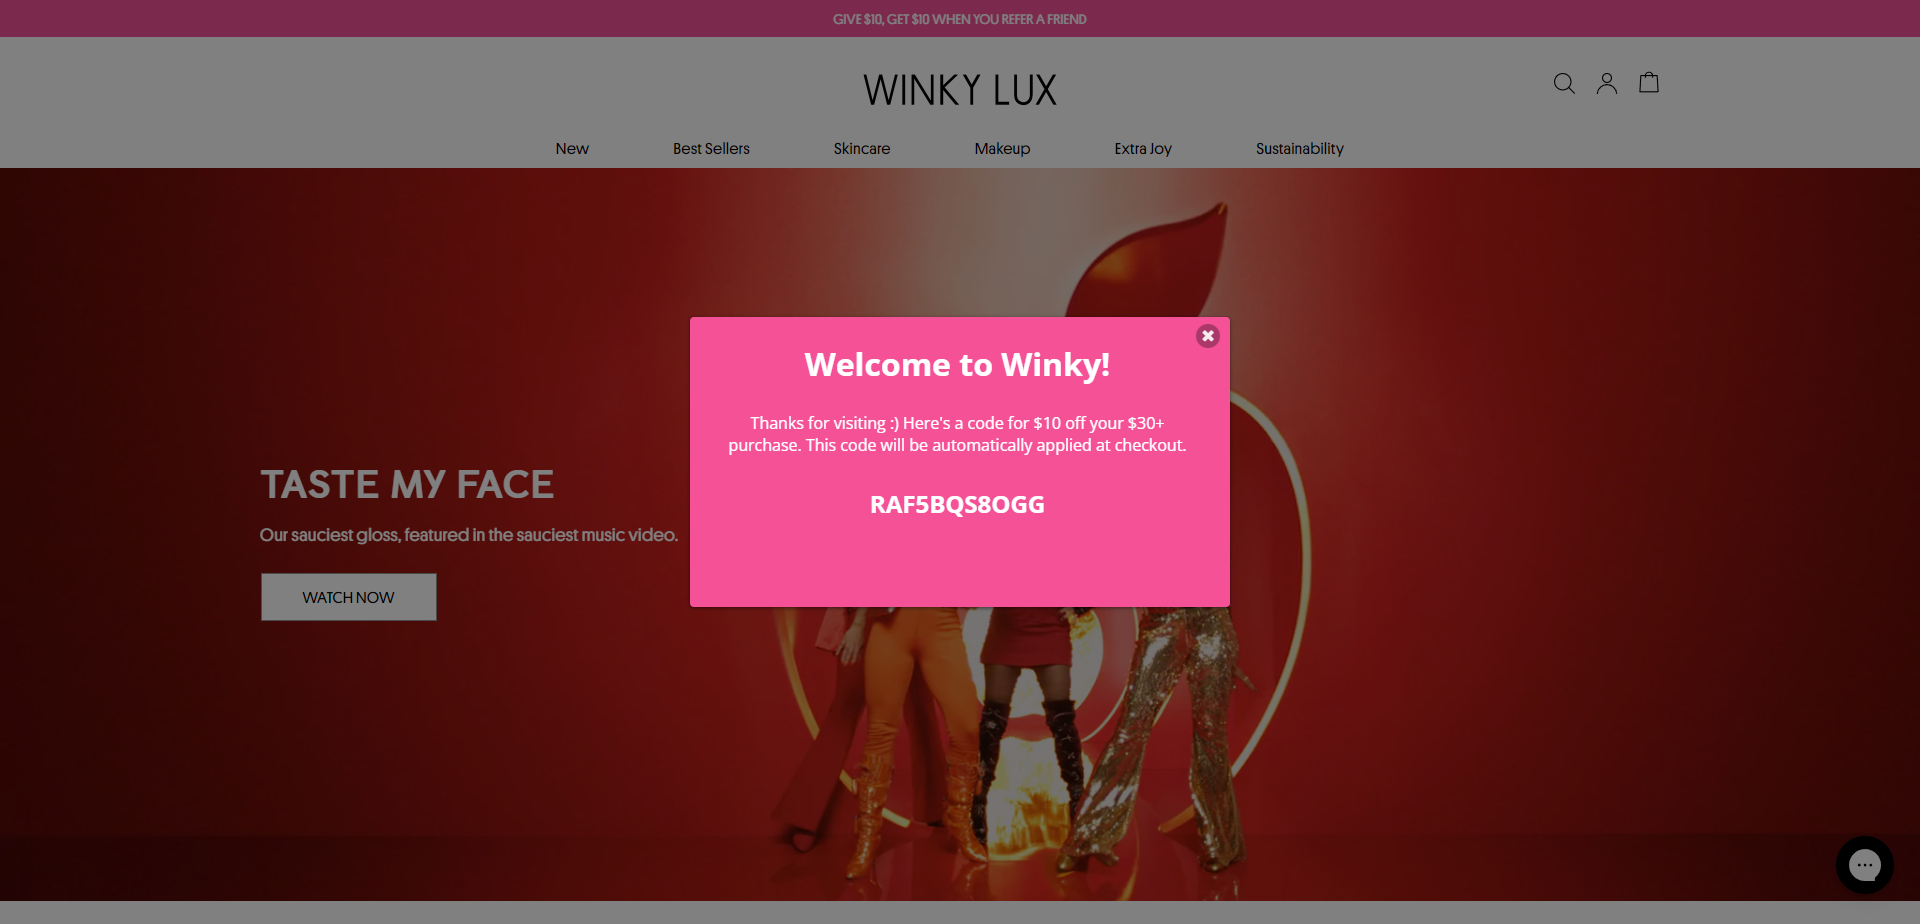 Referral Landing Page for Winky Lux